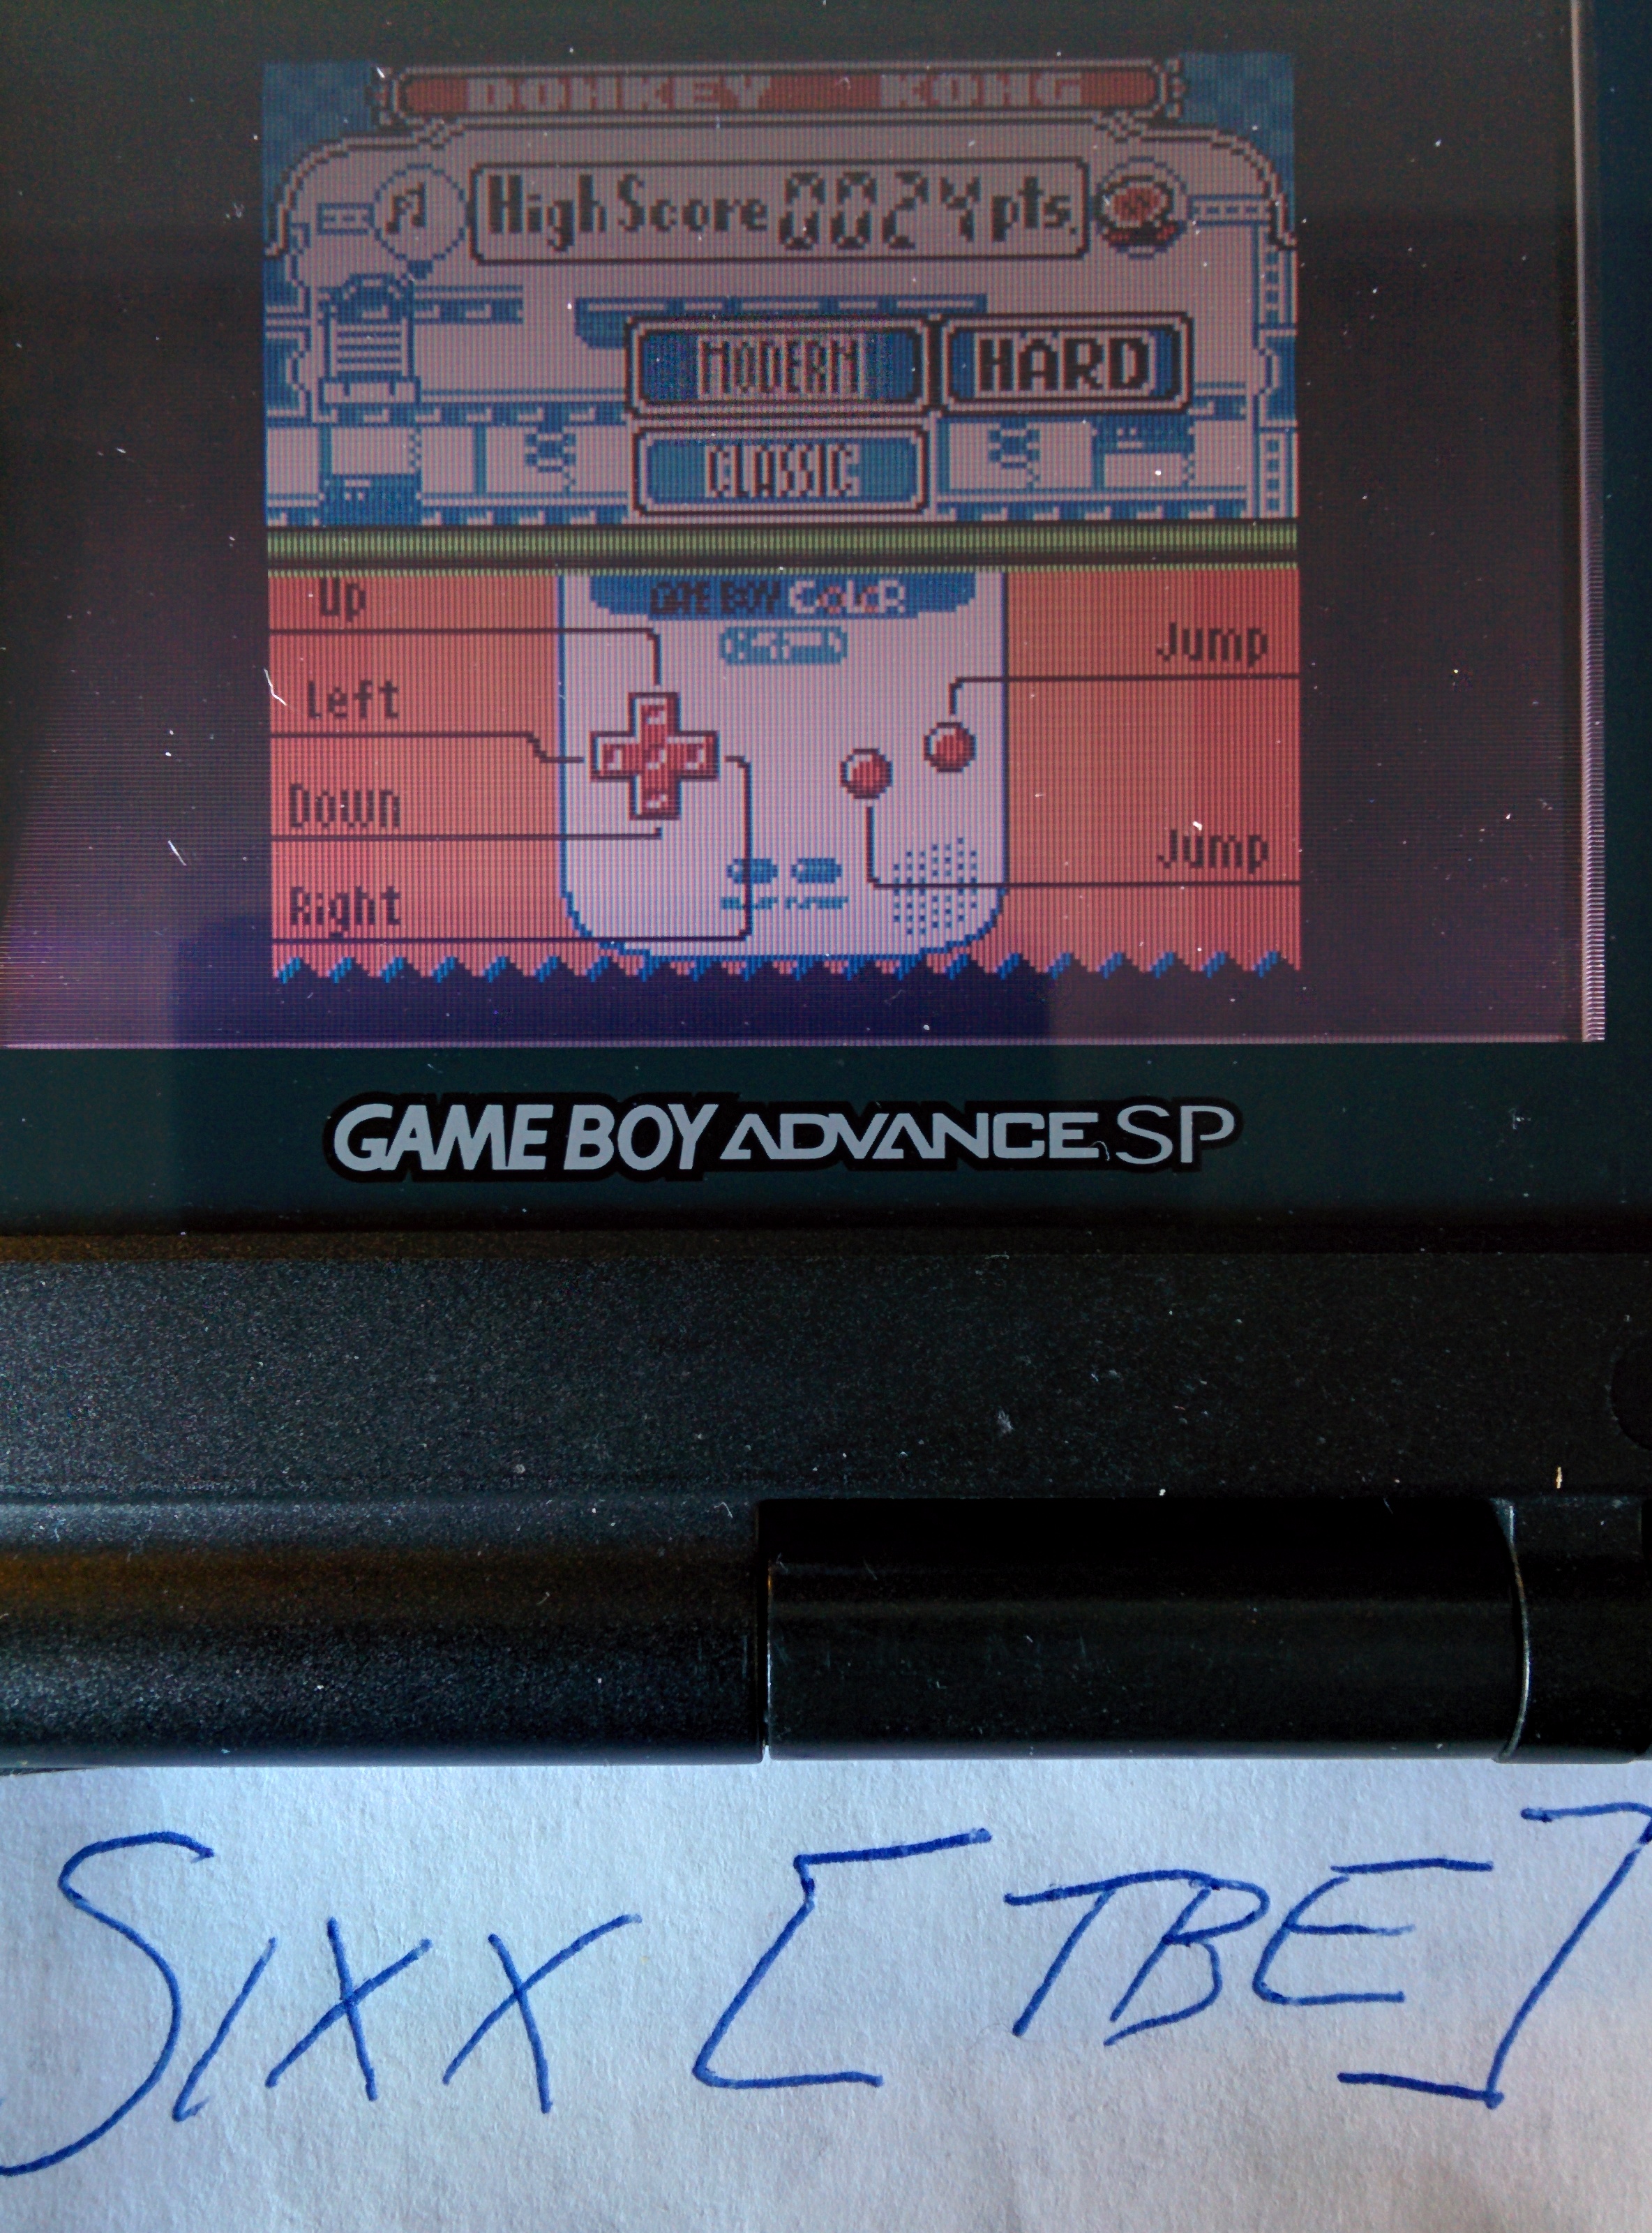 Sixx: Game & Watch Gallery 2: Donkey Kong: Modern: Hard (Game Boy Color) 24 points on 2014-08-23 01:43:39